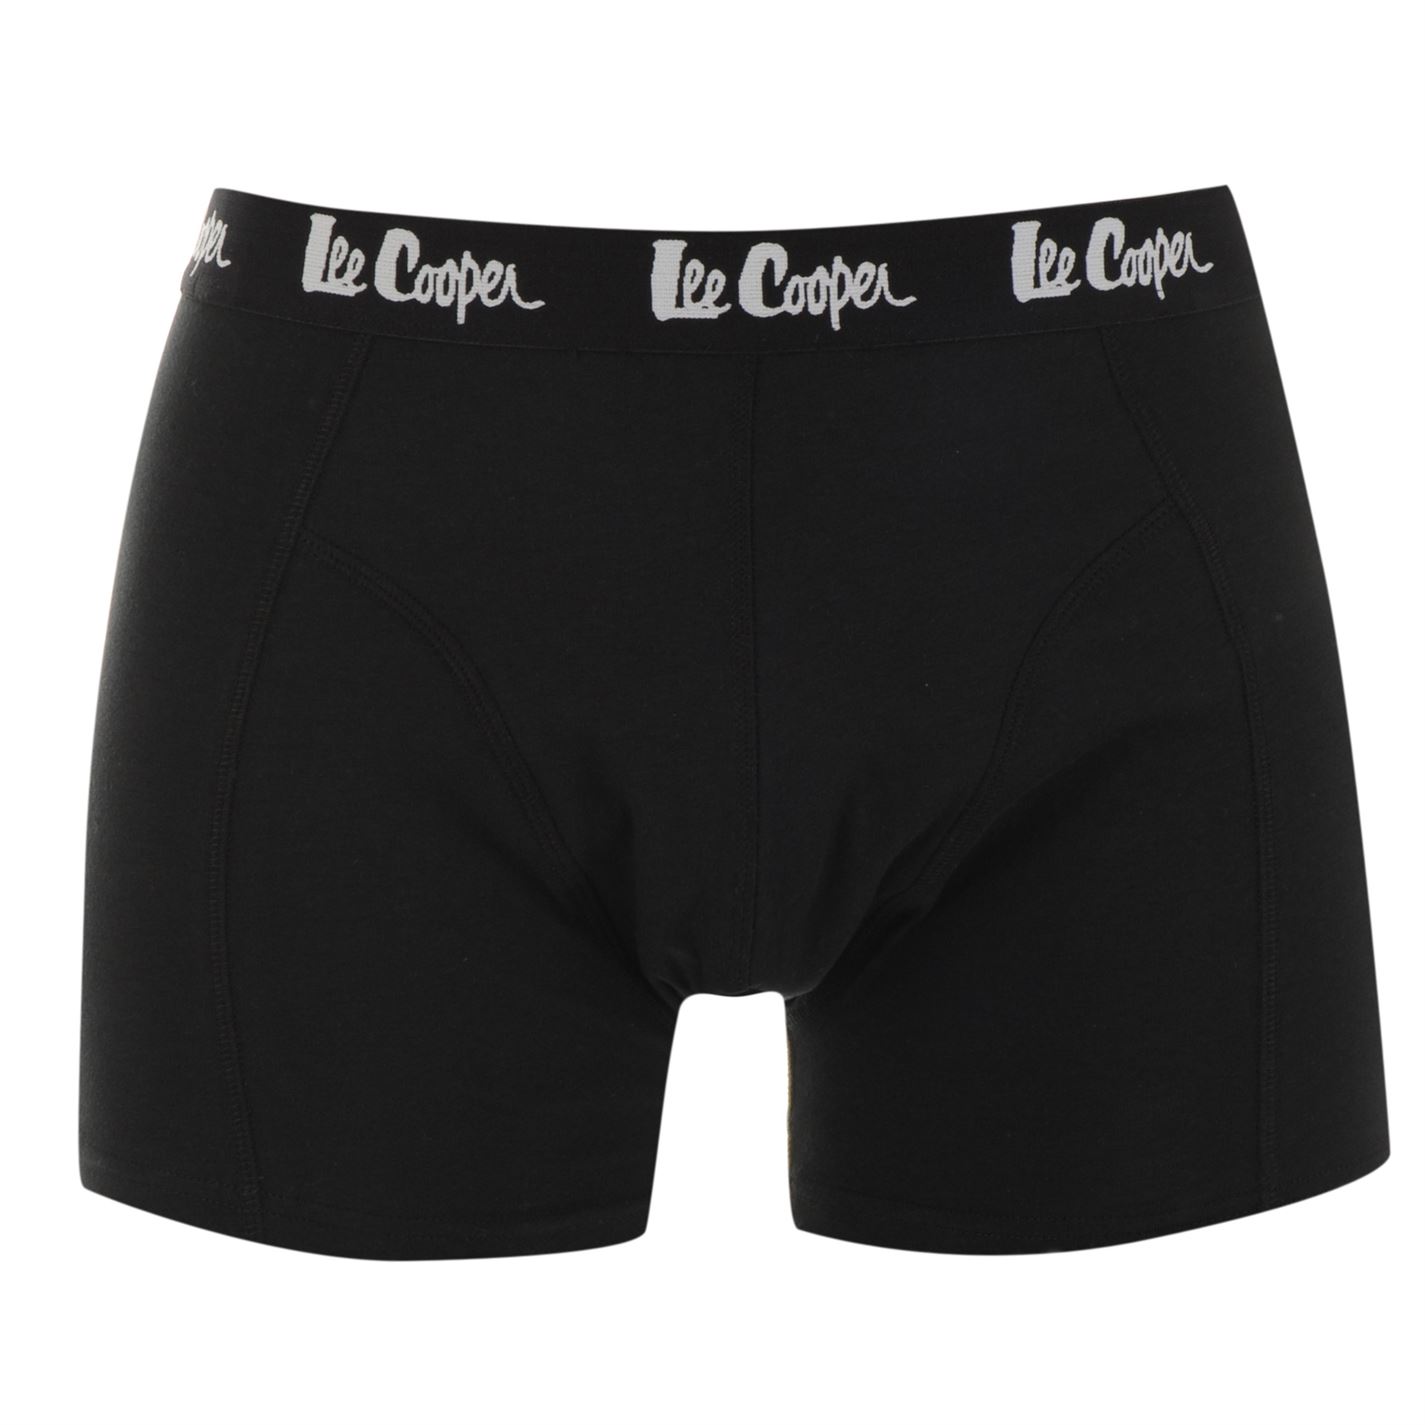 Lee Cooper Boxers 5 Pack Mens Gents Boxer Underclothes Elasticated ...